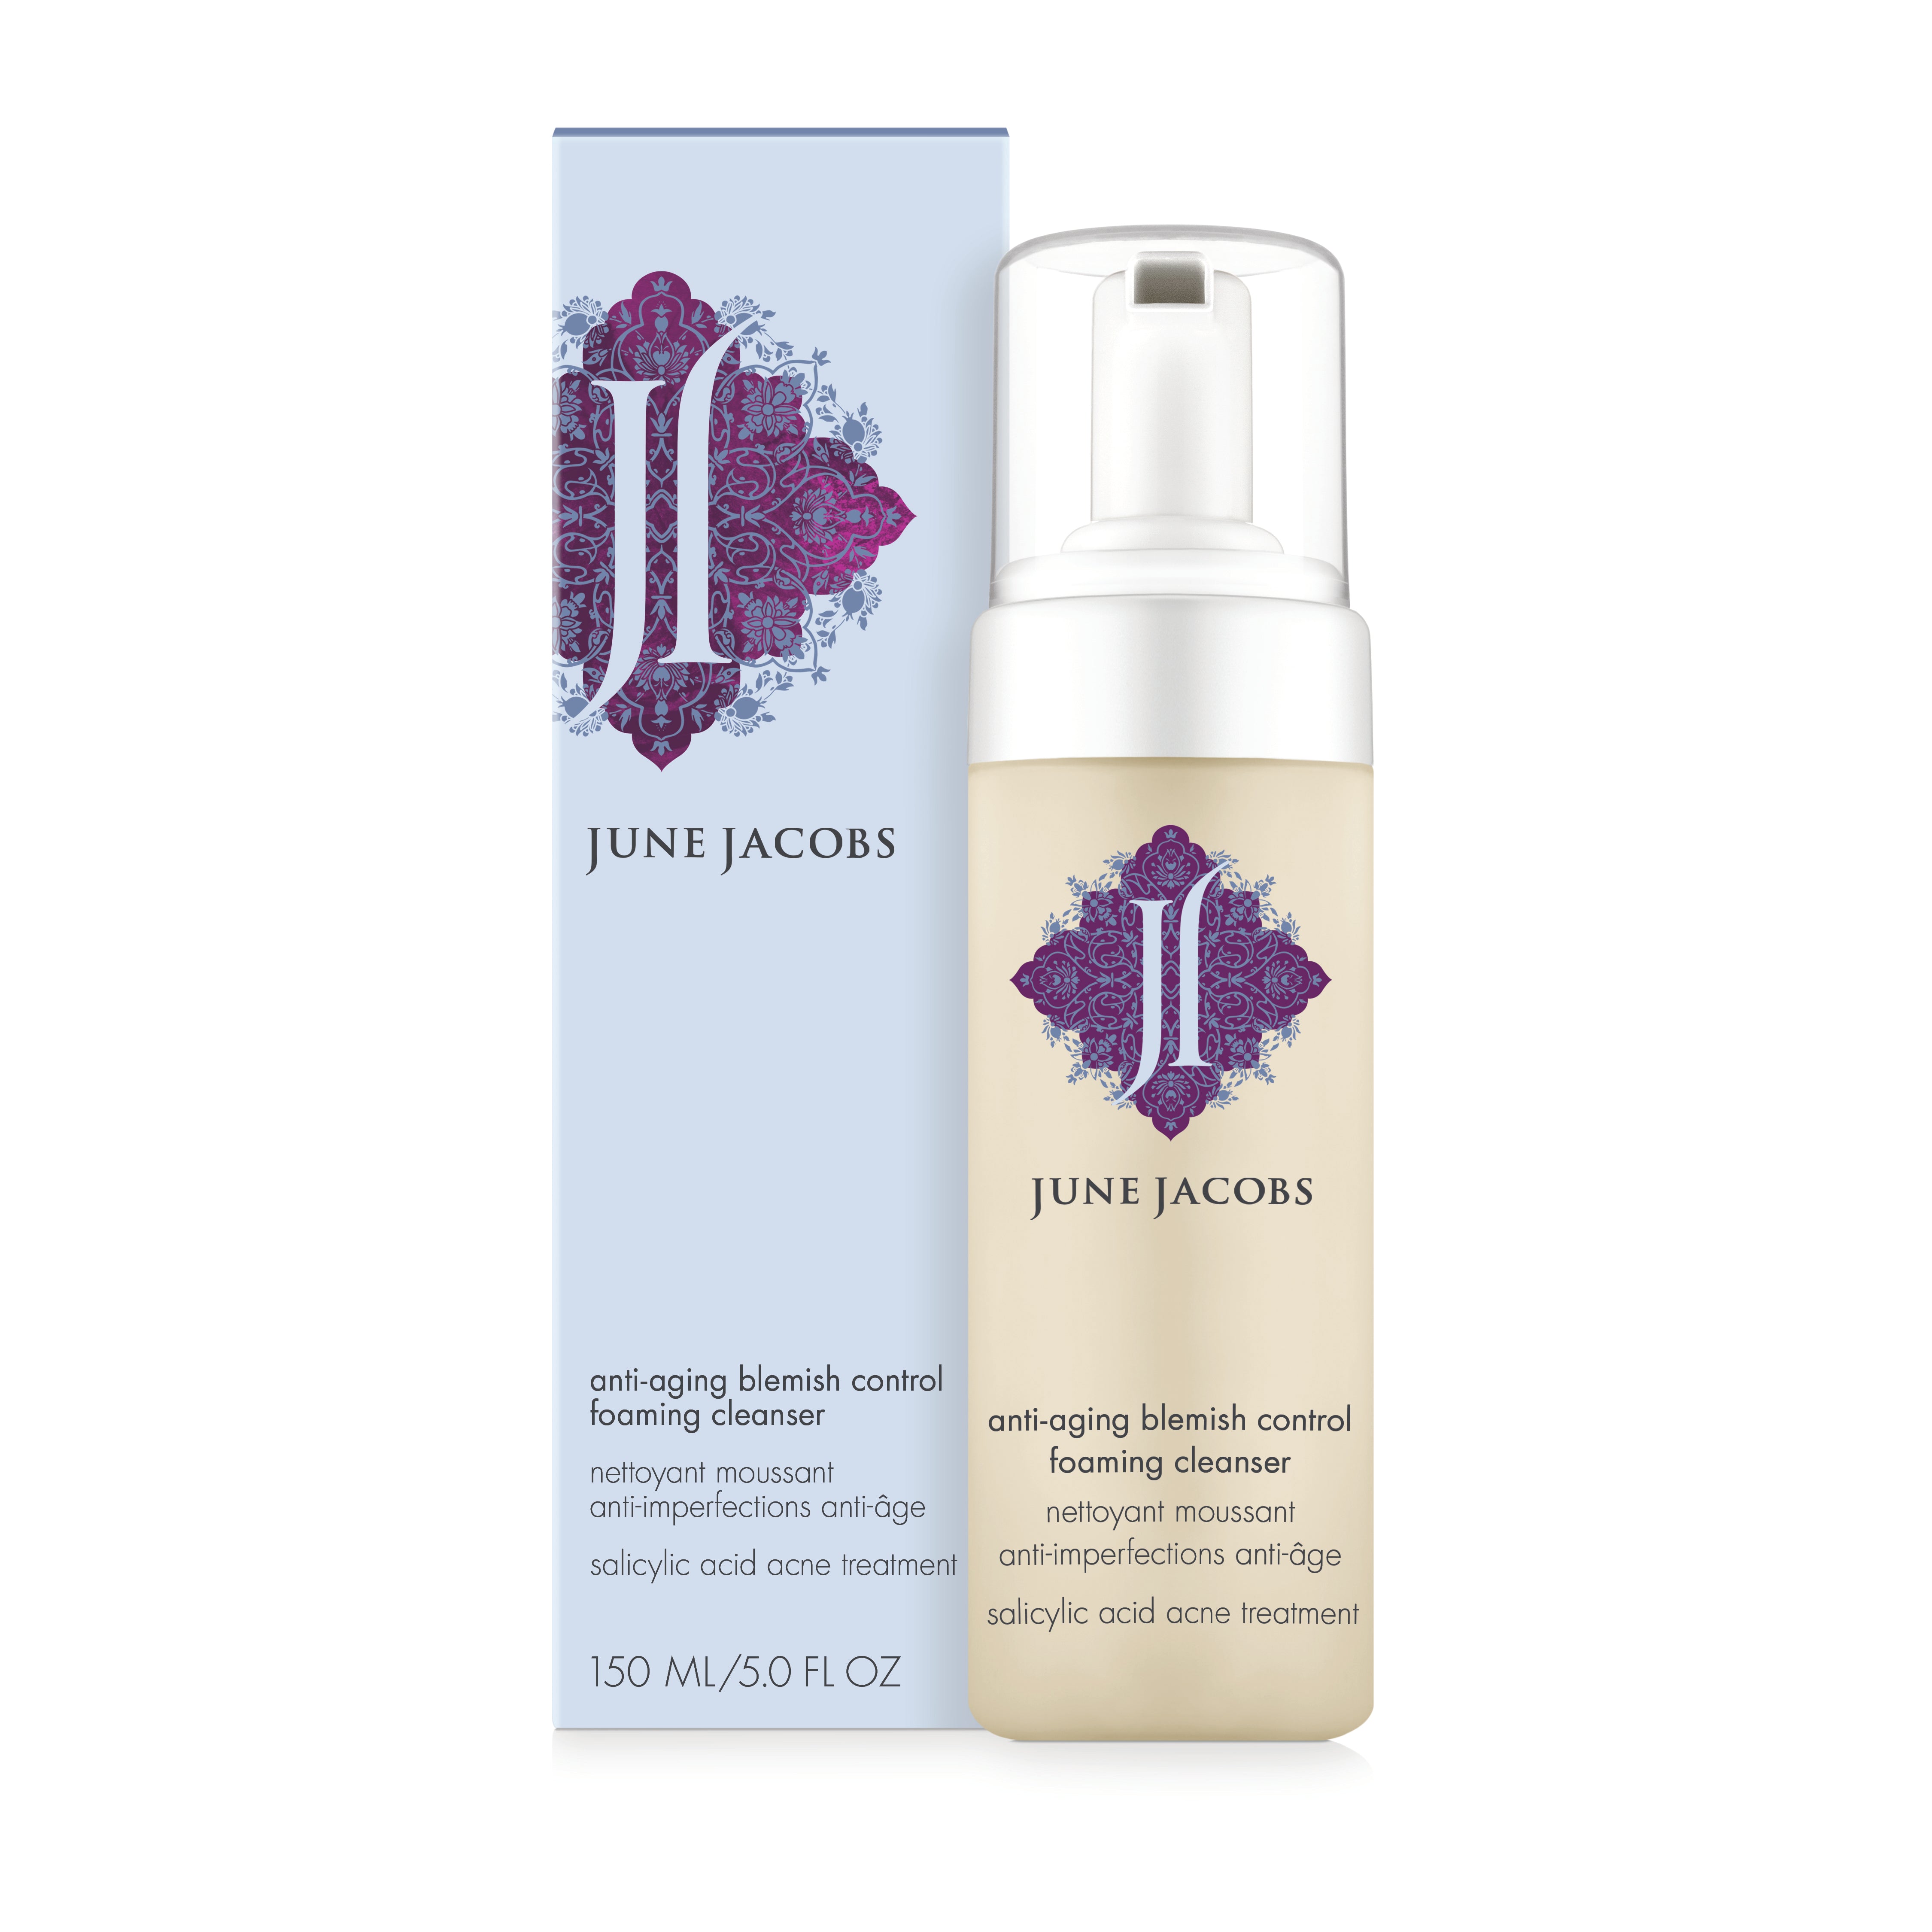 June Jacobs Anti-Aging Blemish Control Foaming Cleanser 5.0oz